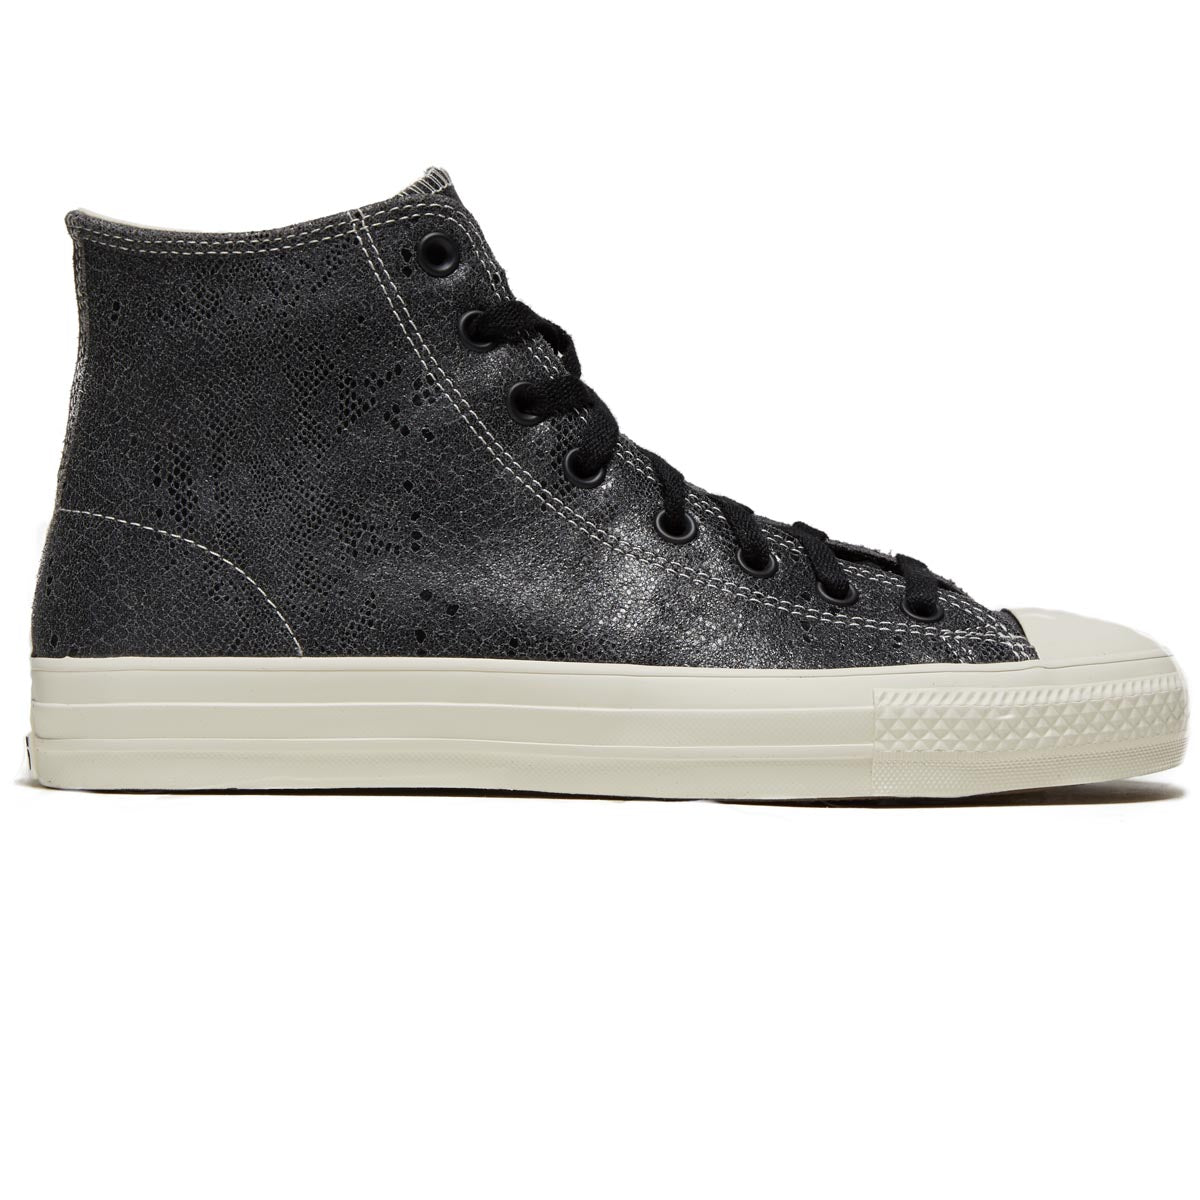 Converse Chuck Taylor All Star Pro Snake Suede Hi Shoes - Black/Dolphin/Egret image 1